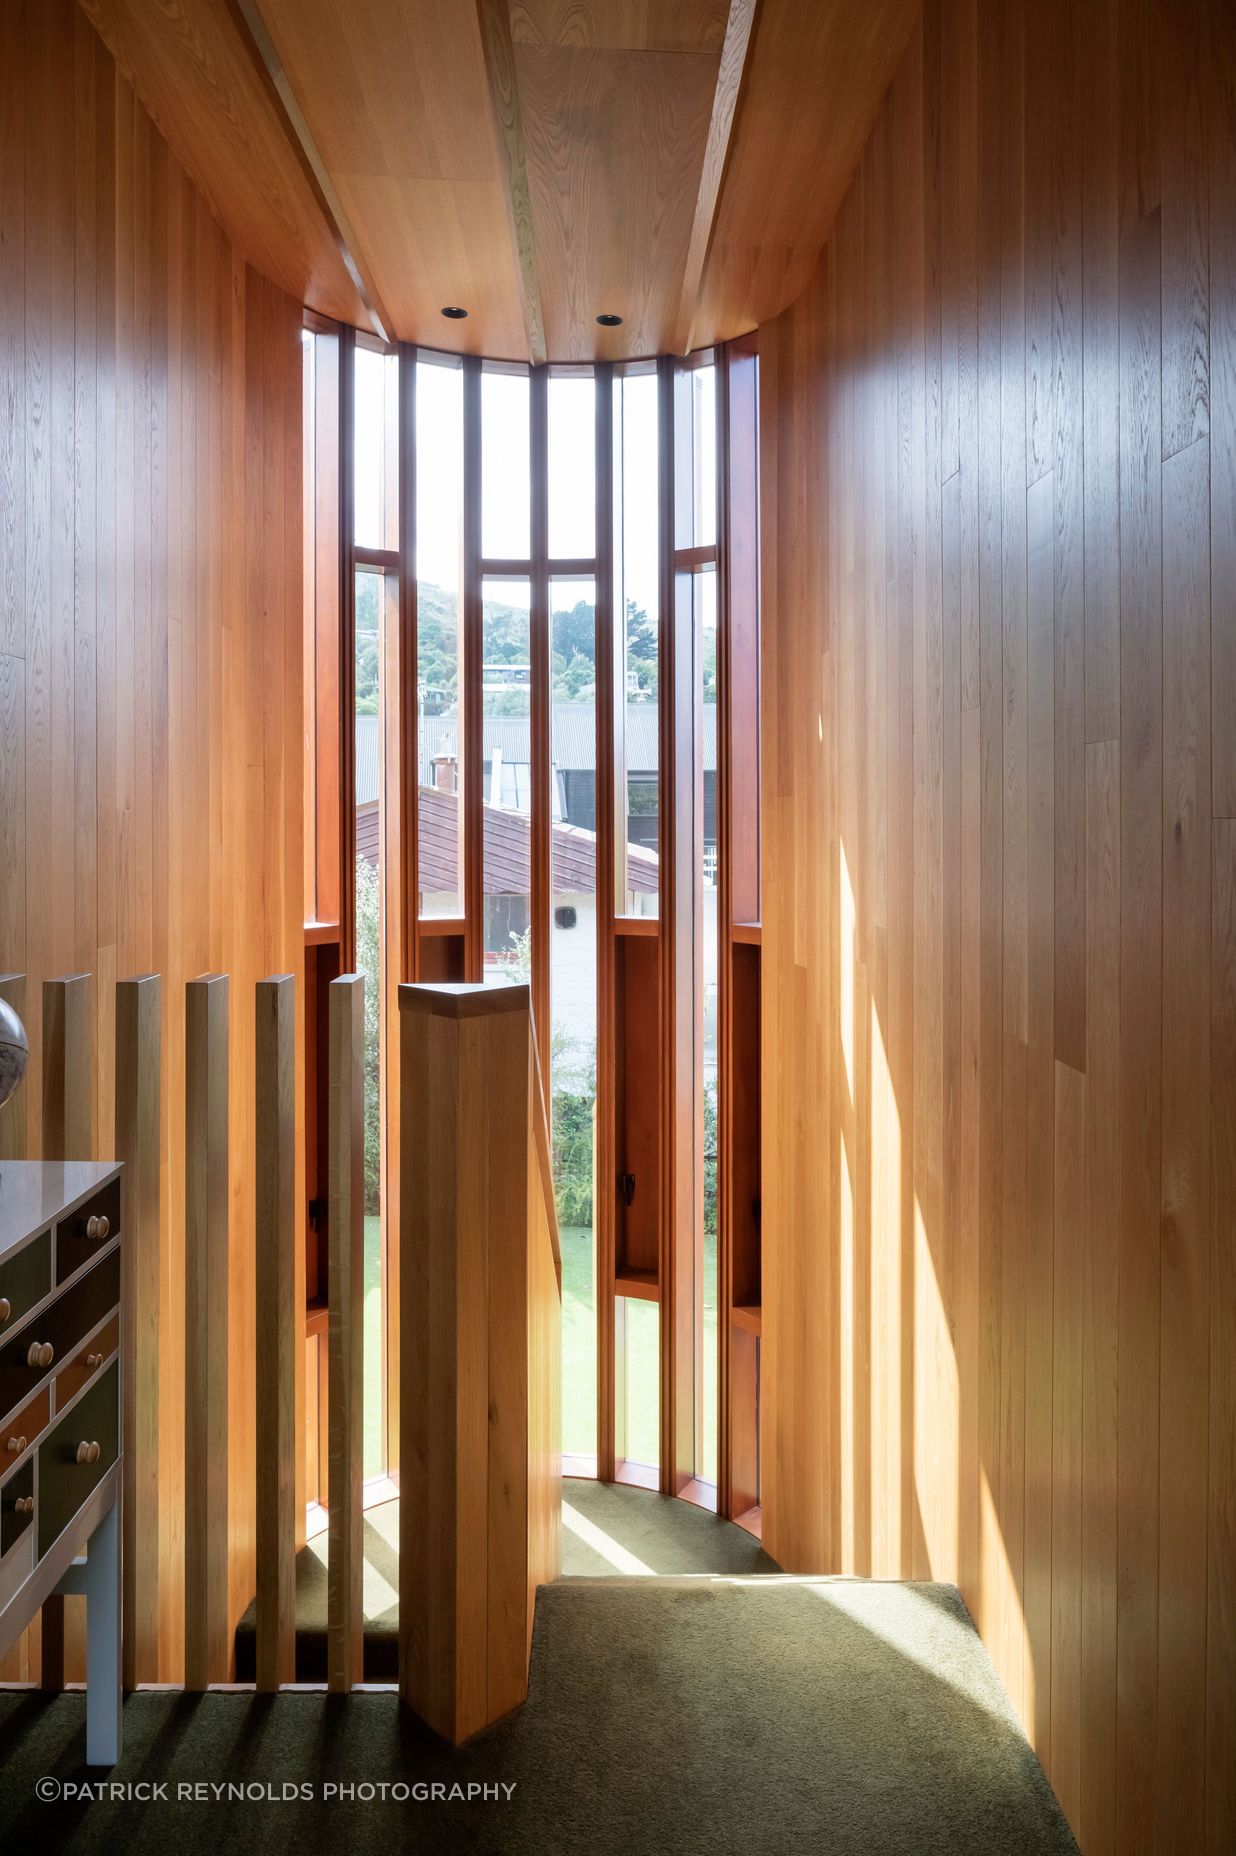 Curved cedar joinery in the stairwell was a challenge, says Brad.